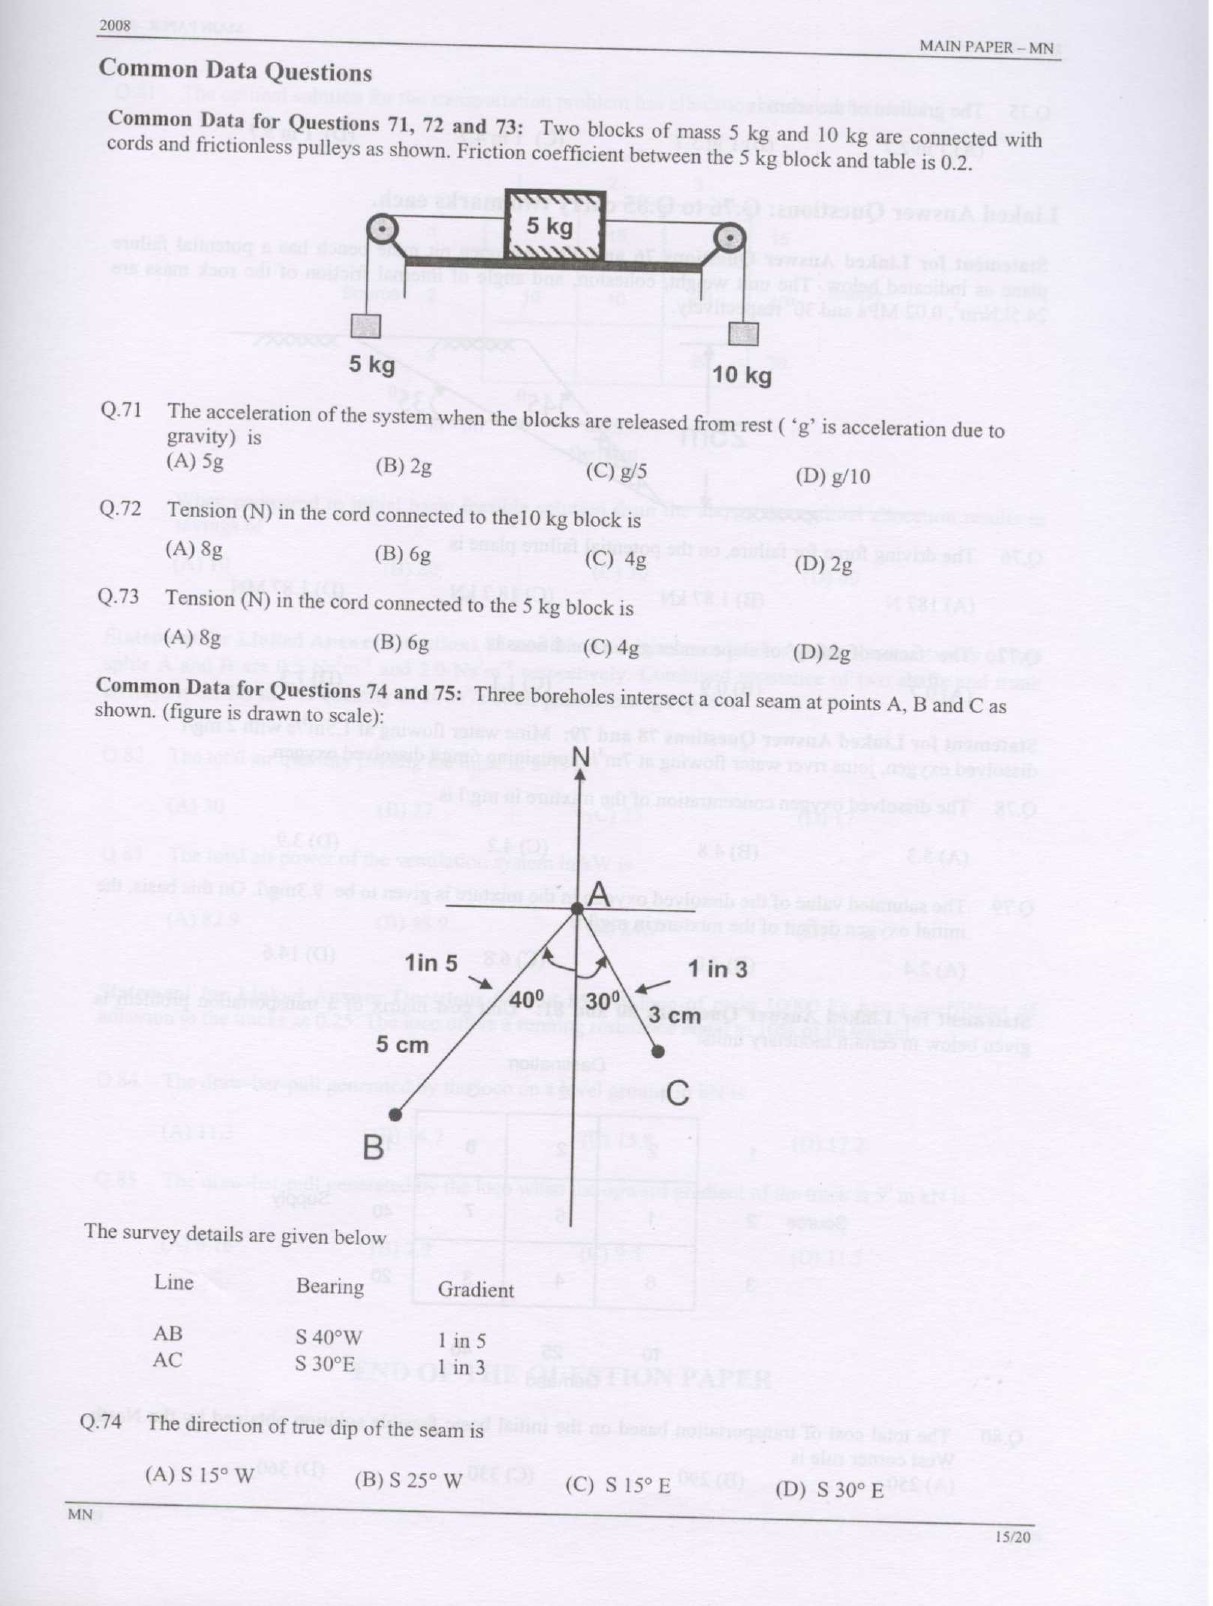 GATE Exam Question Paper 2008 Mining Engineering 15